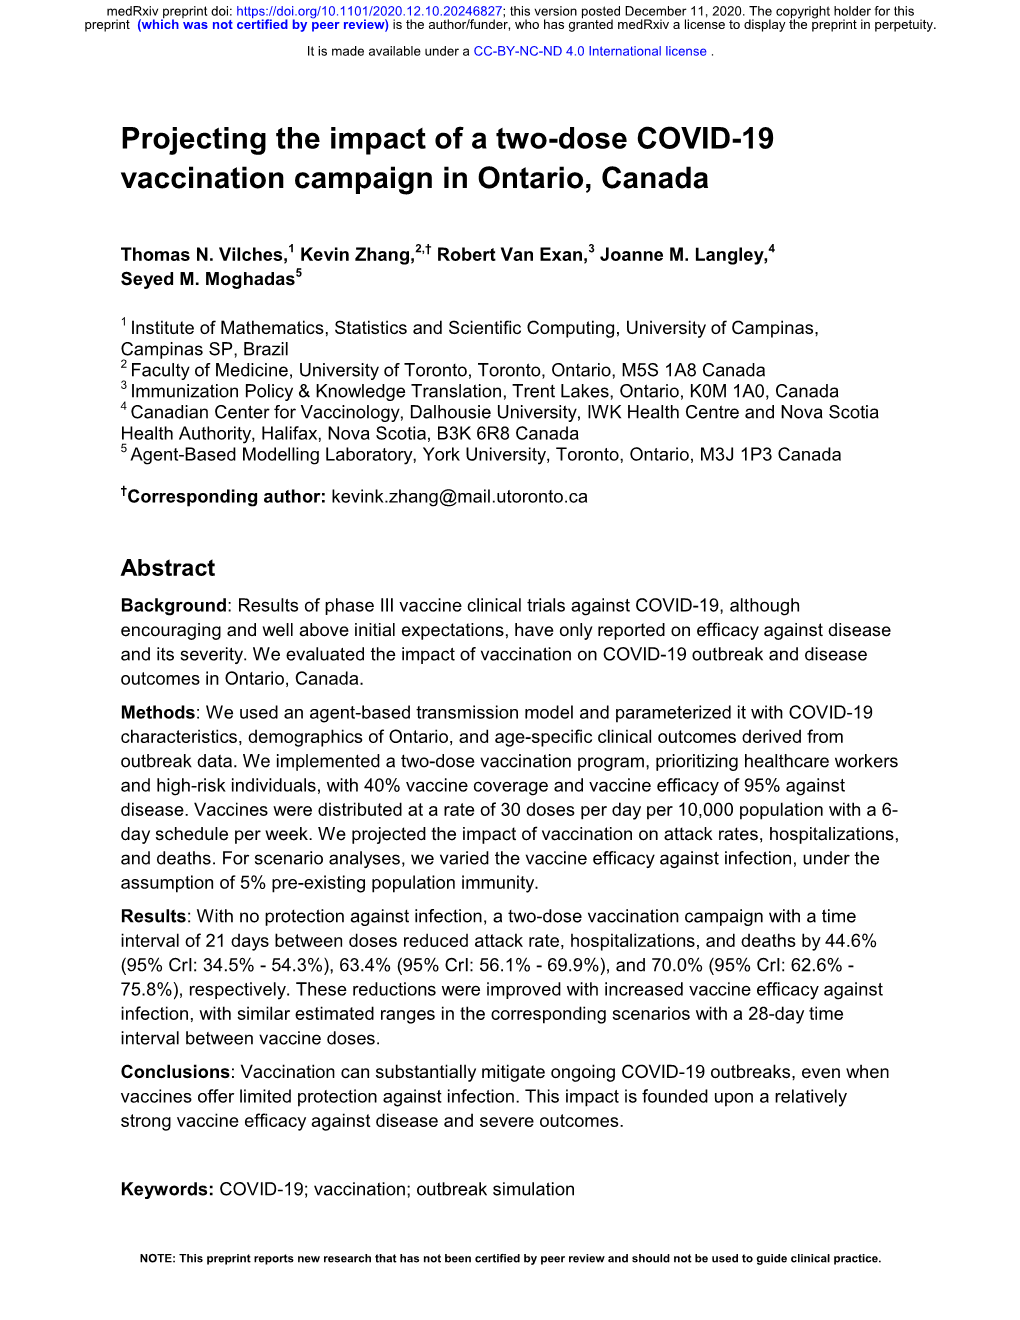 Projecting the Impact of a Two-Dose COVID-19 Vaccination Campaign in Ontario, Canada